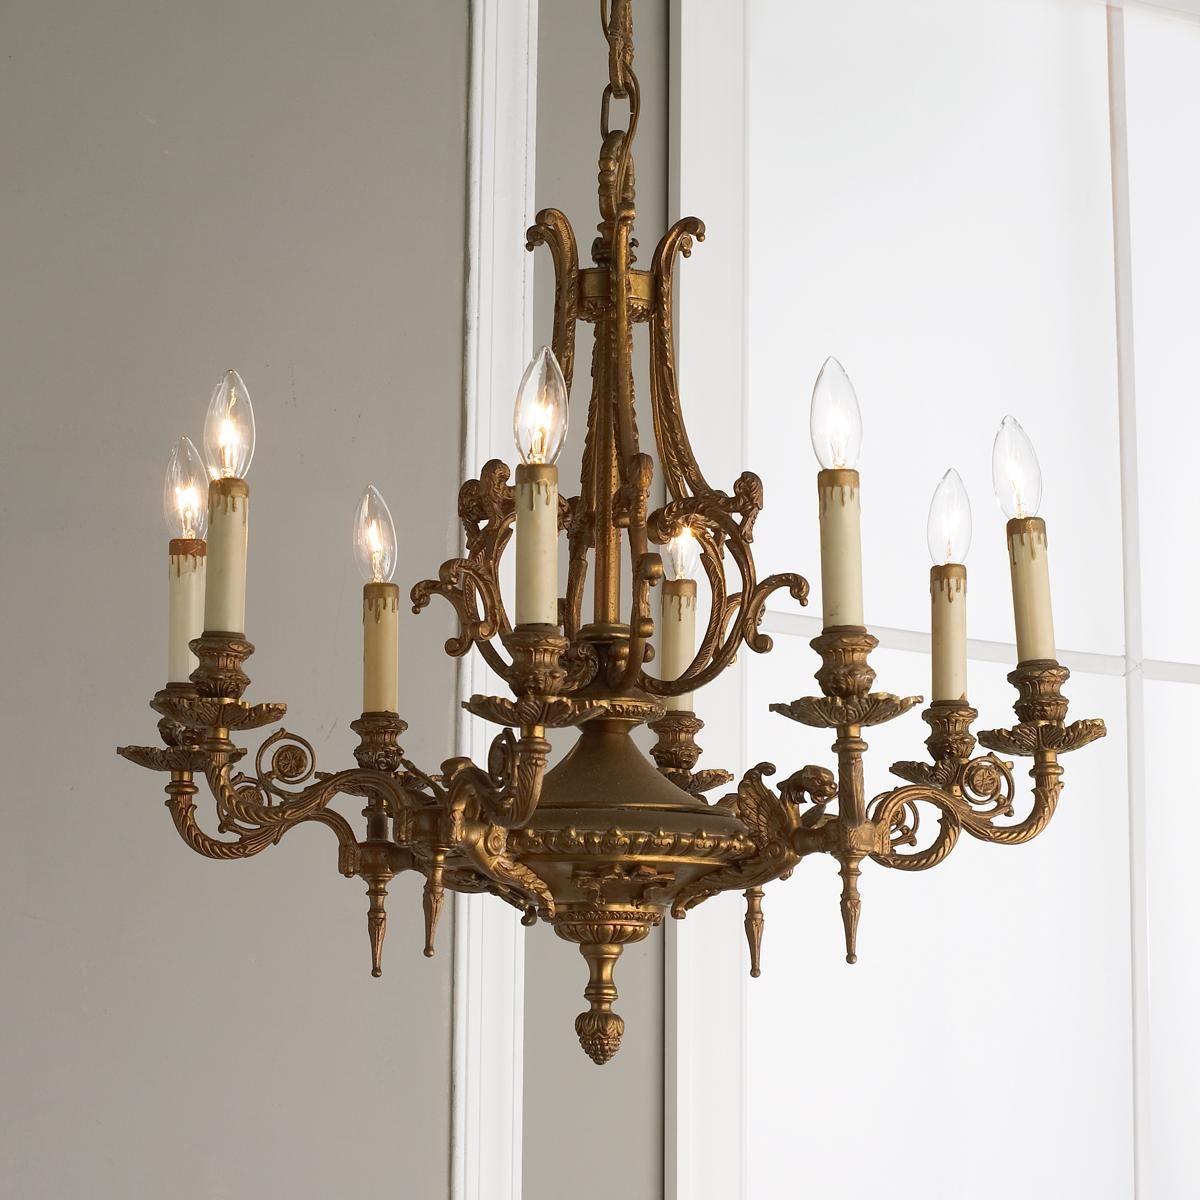 Antique Chandelier : Elegant Antique Chandelier Adds Vintage Flair to Any Room